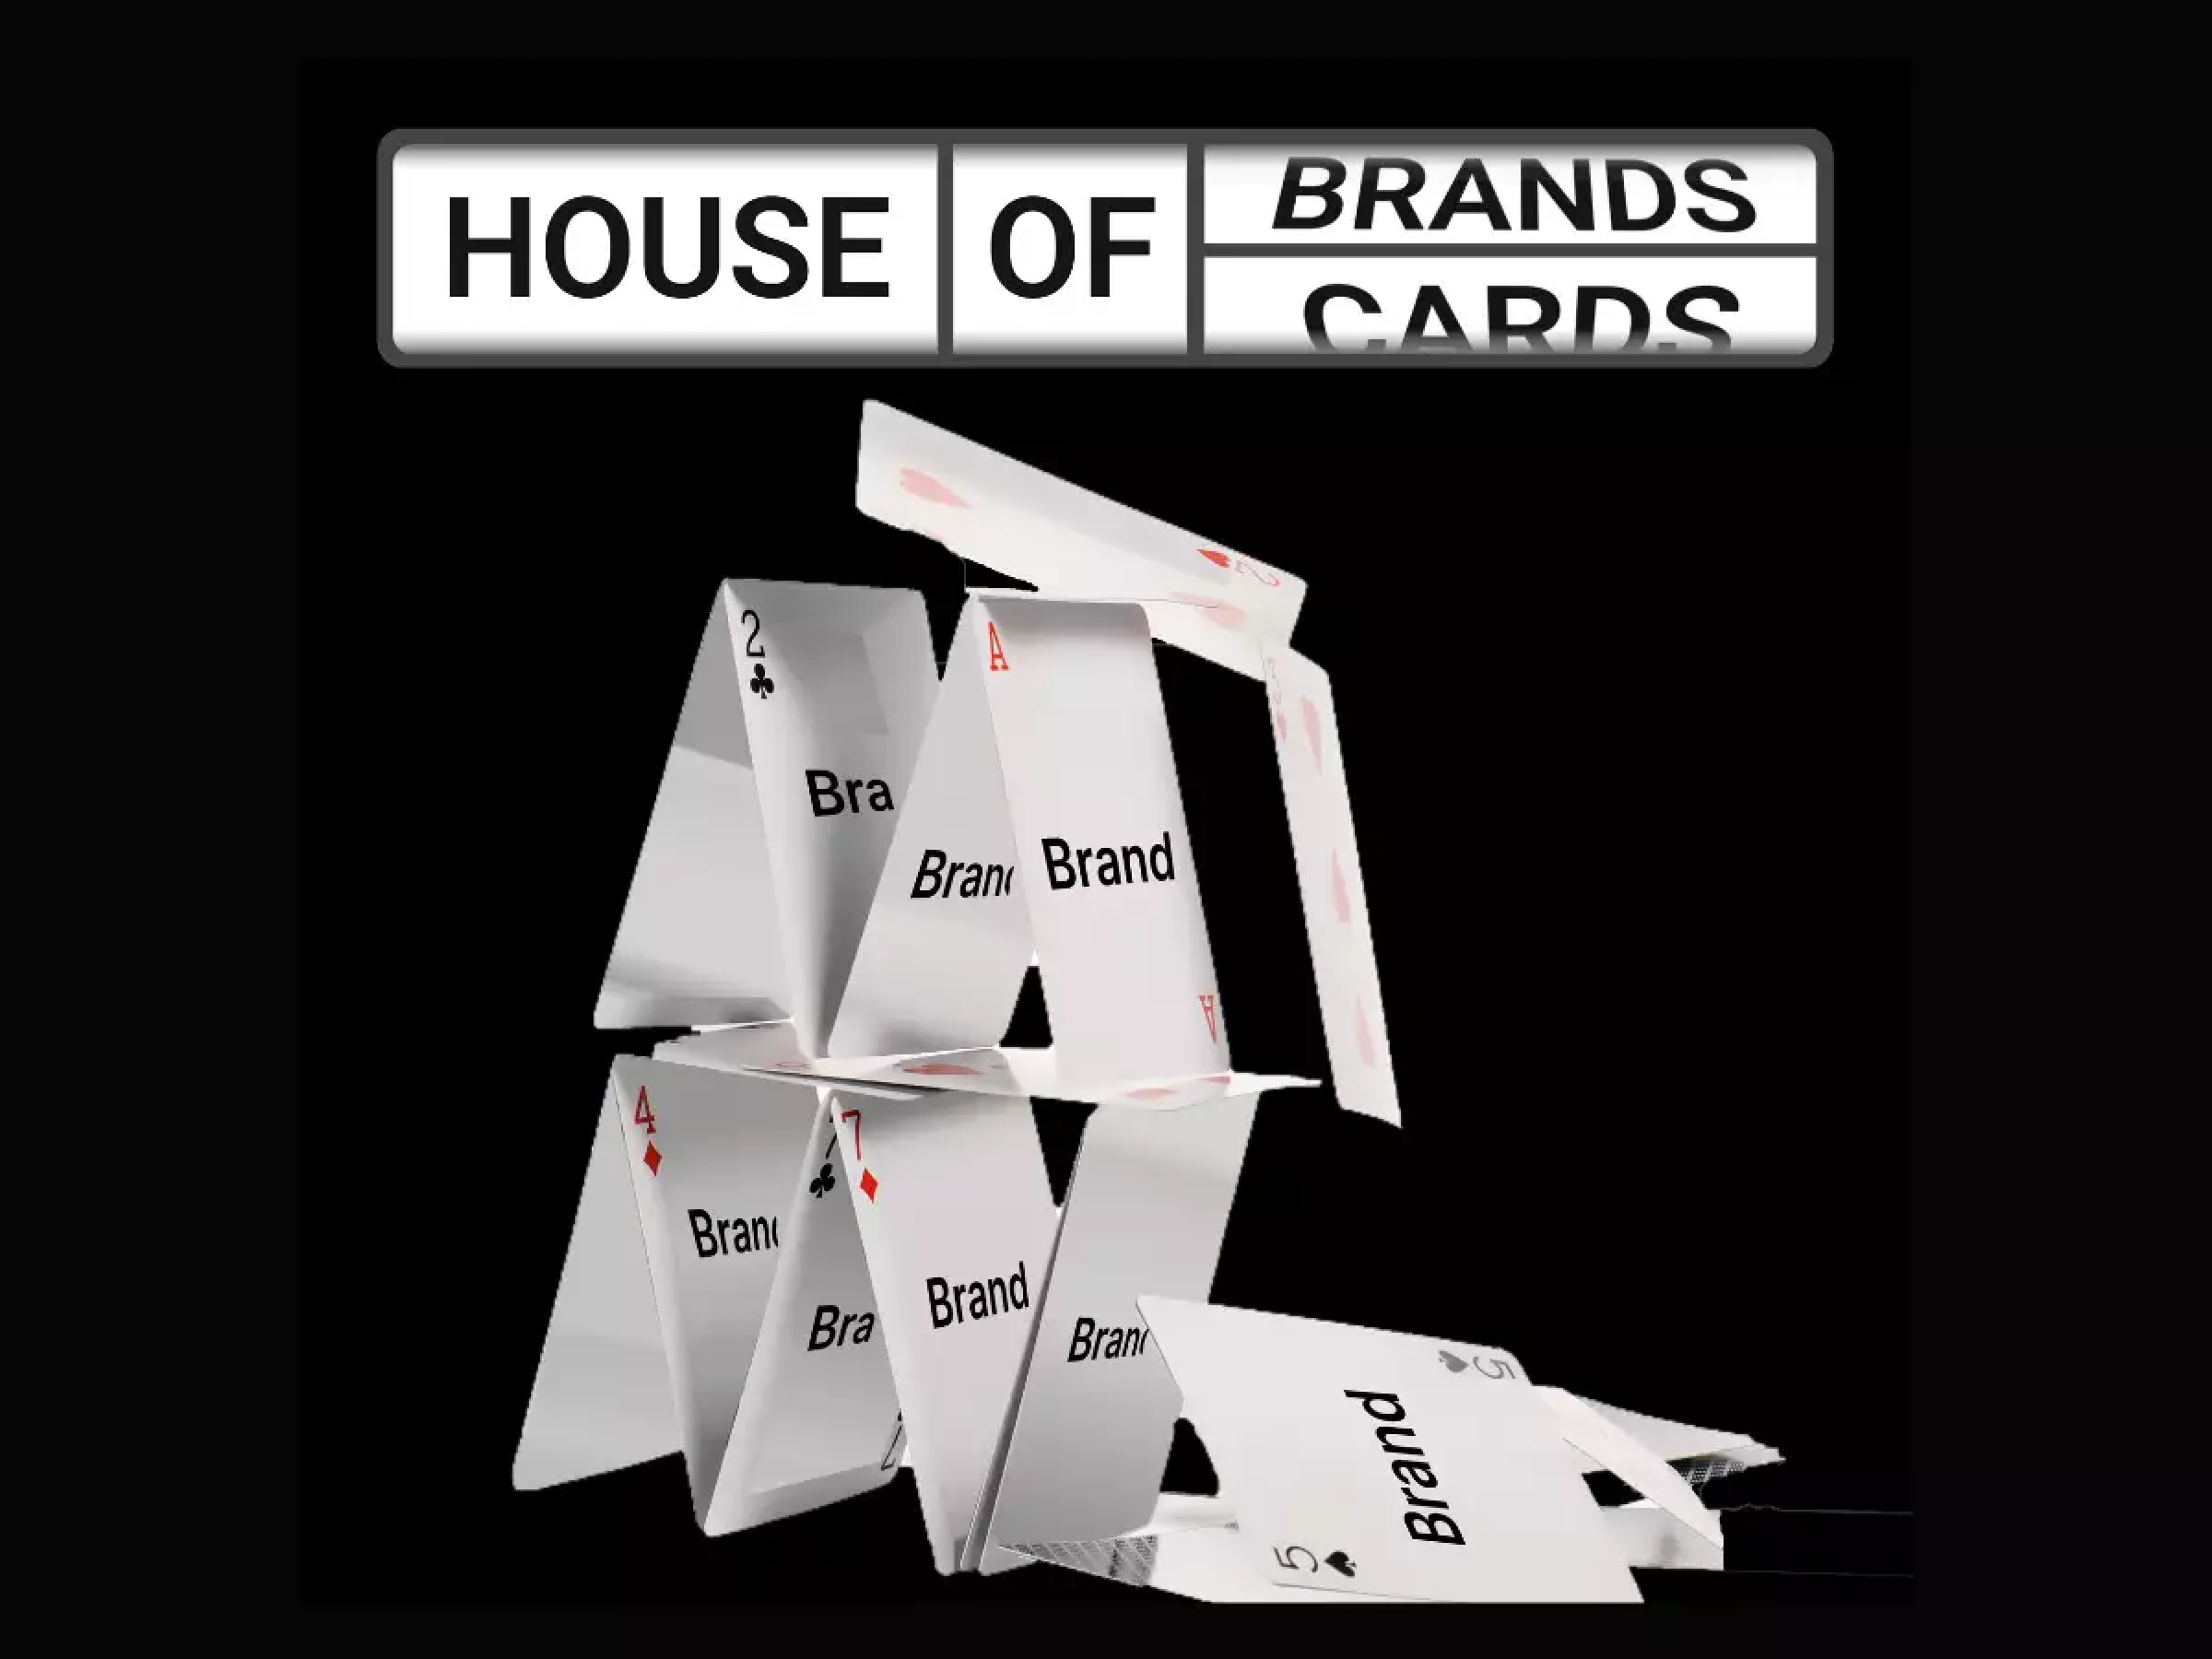 House of brands...or house of cards?